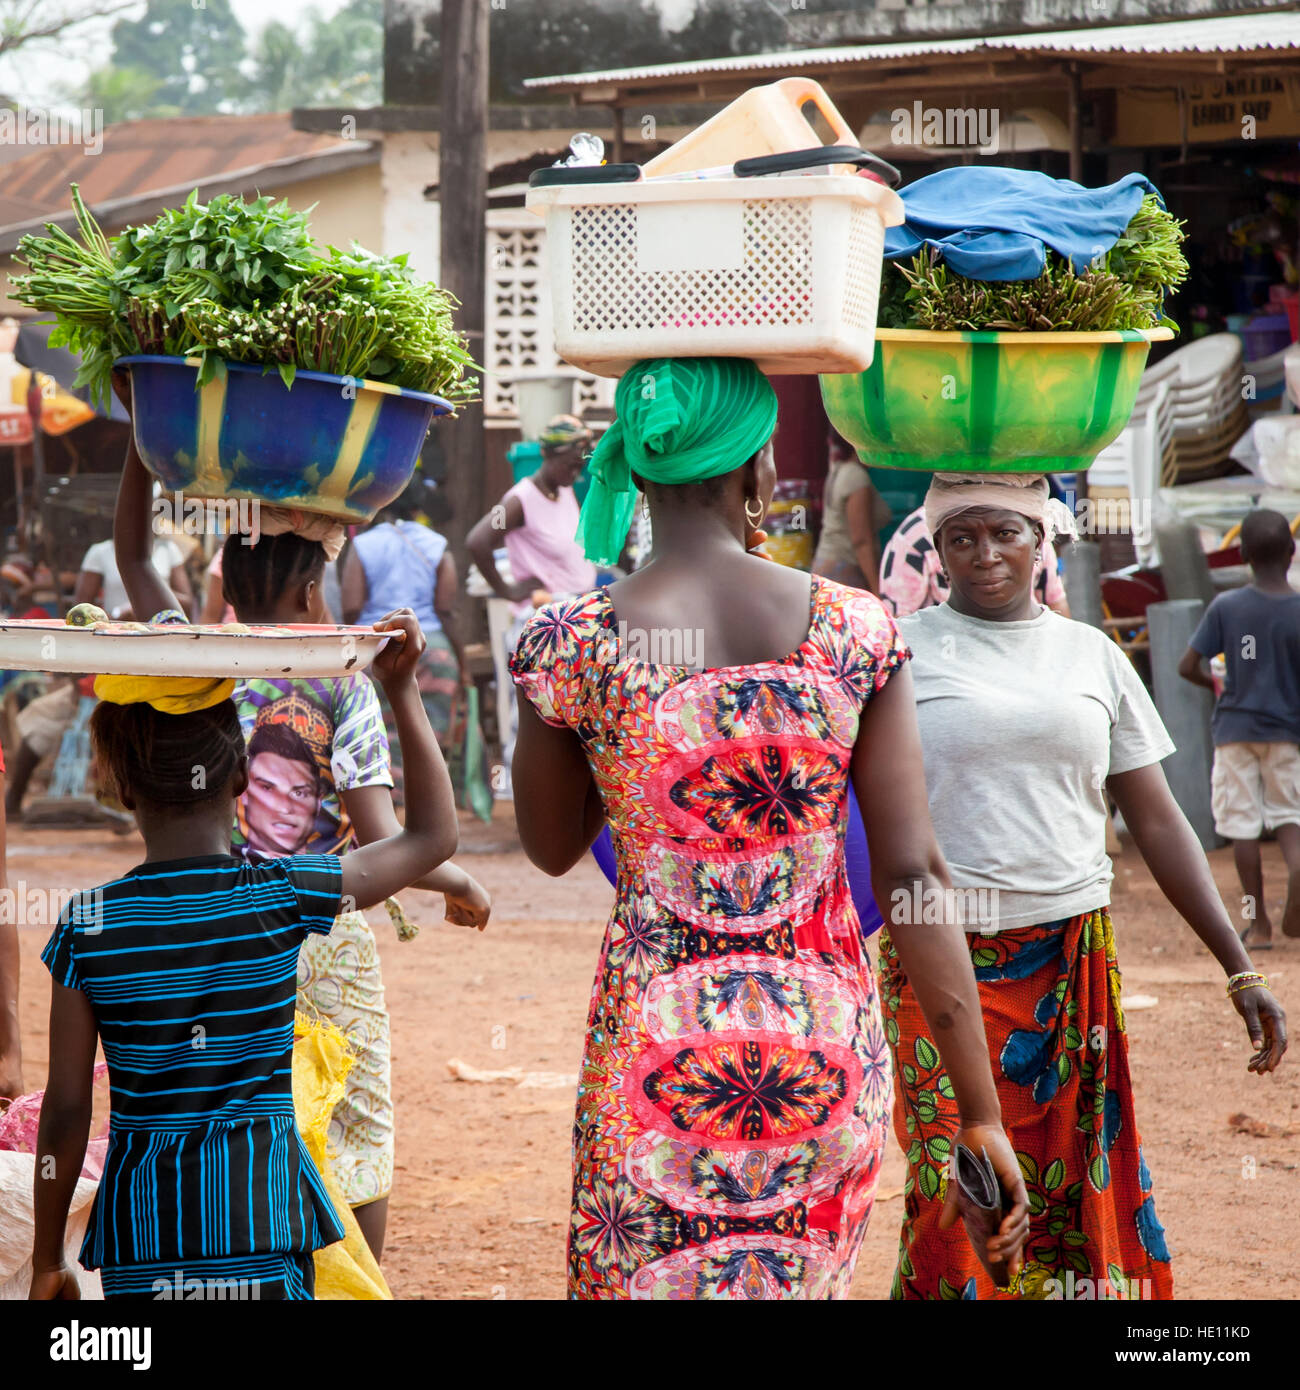 African women carrying trays and bowls Stock Photo